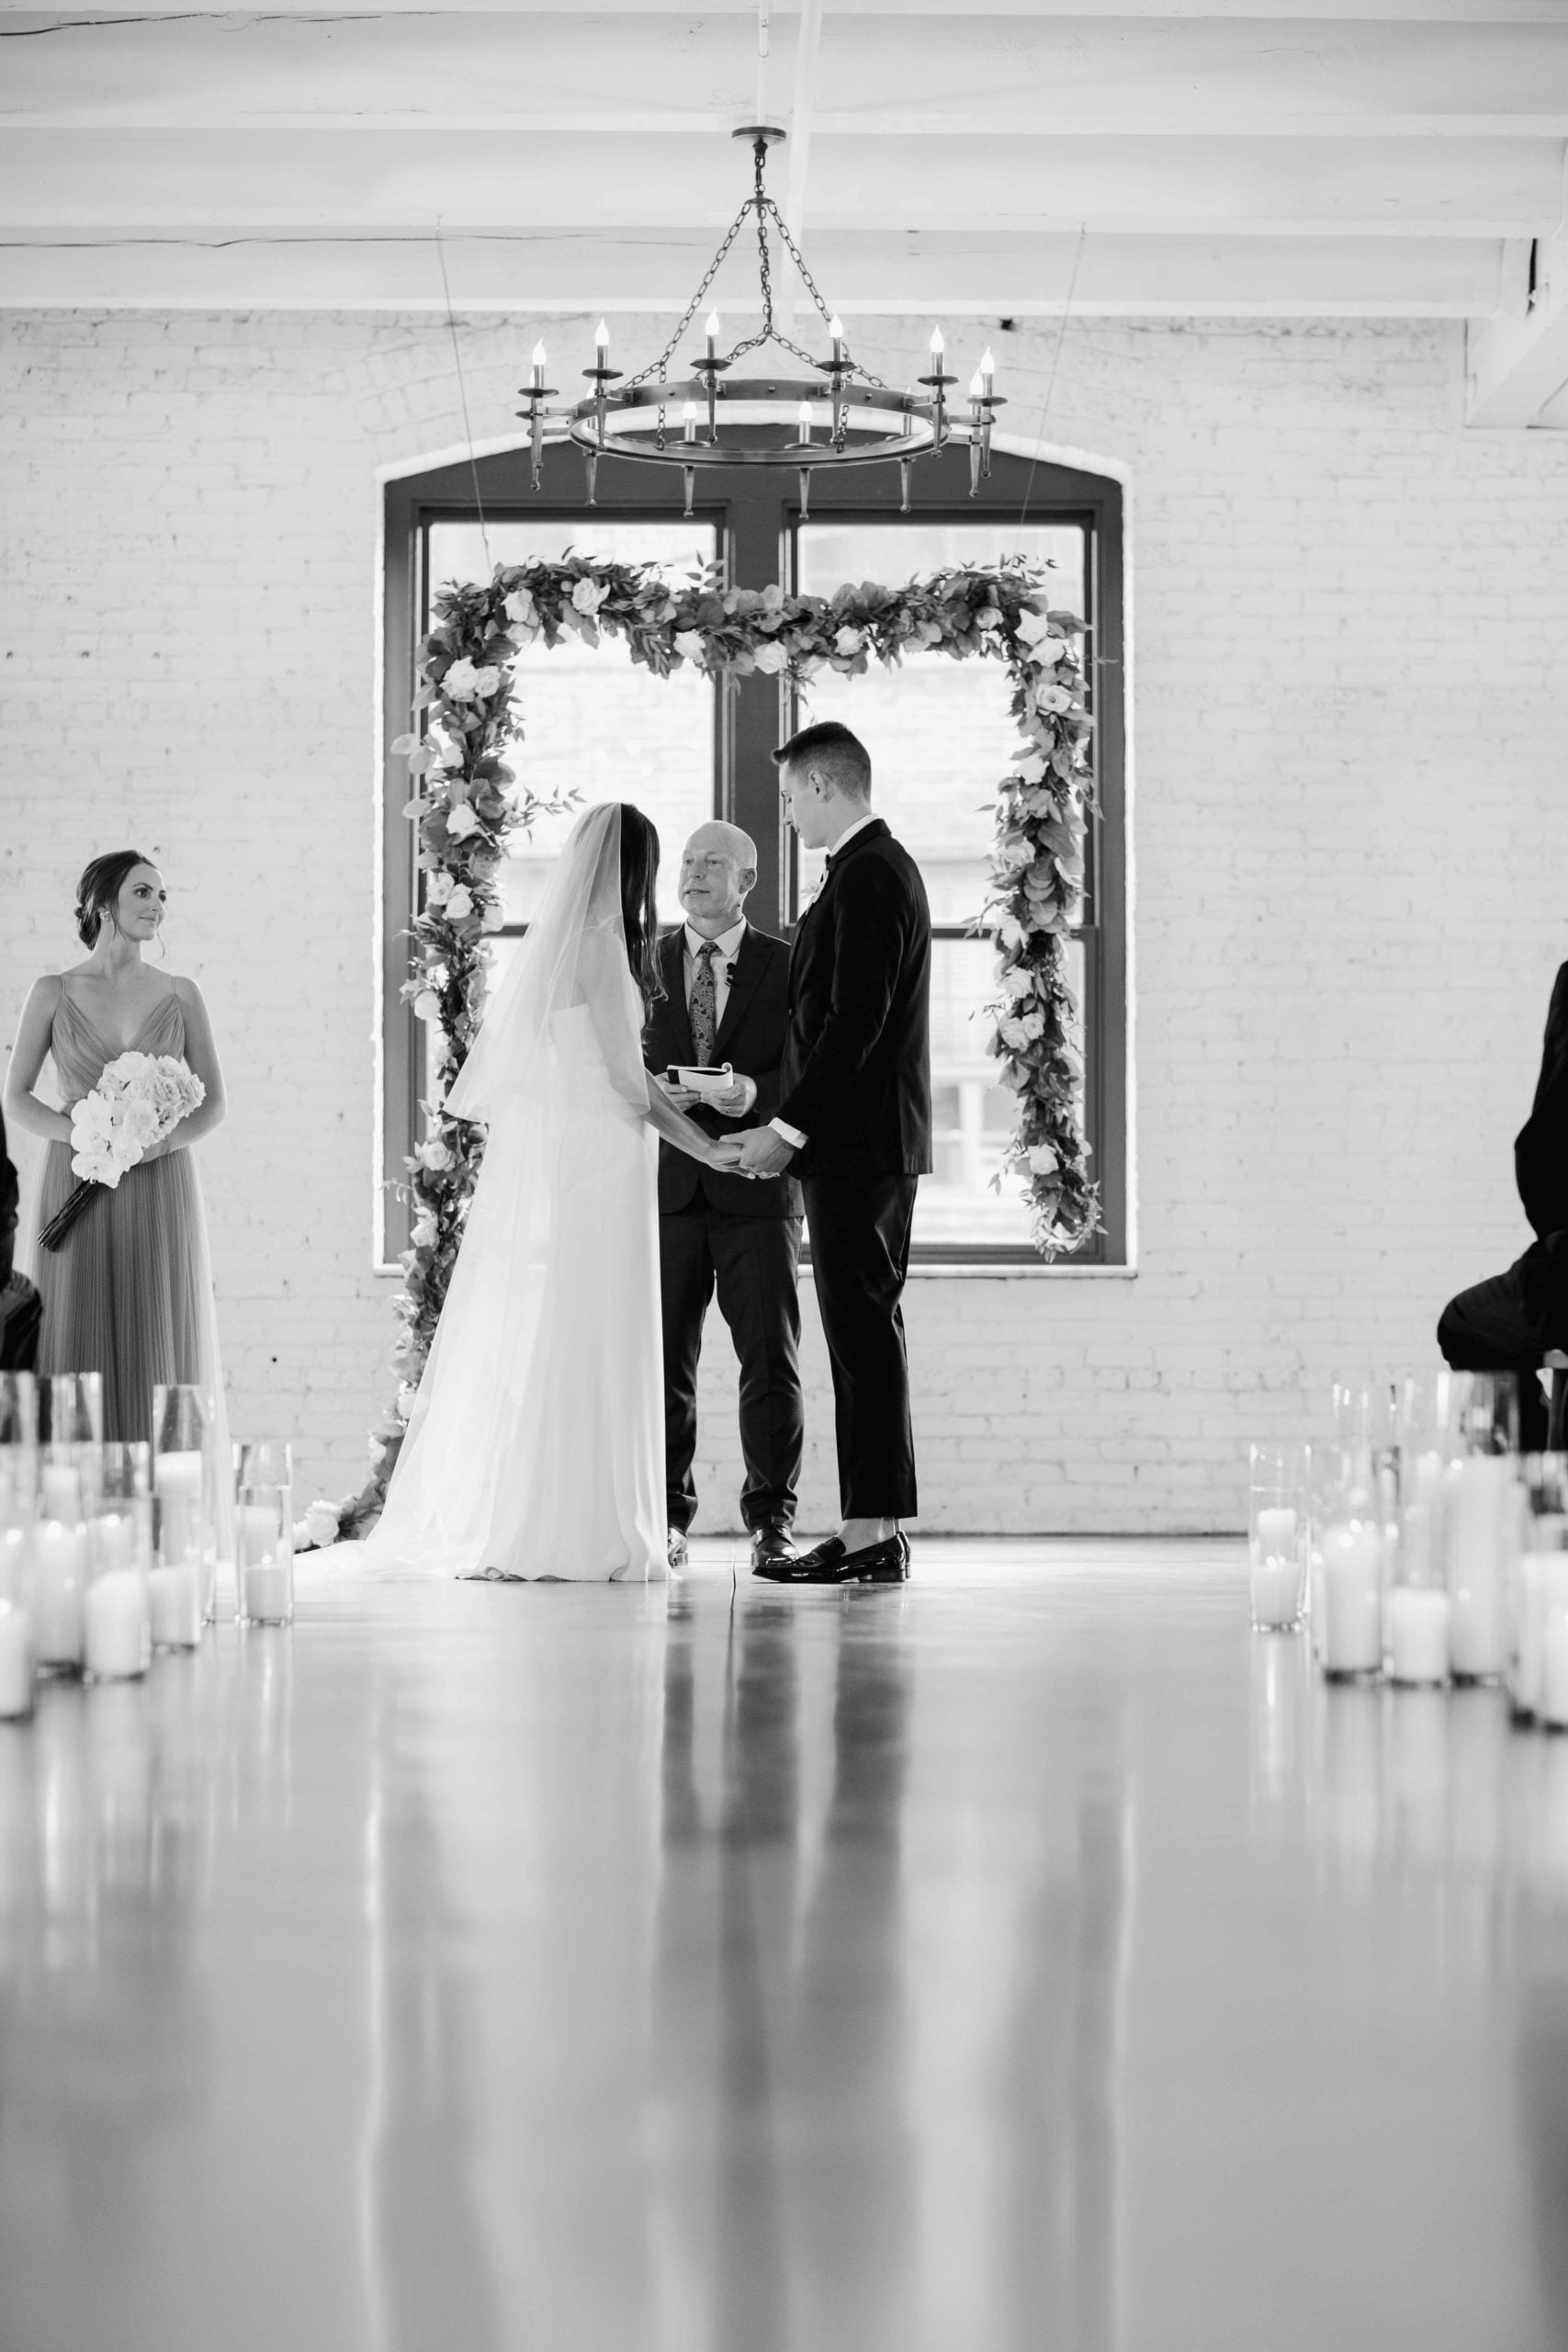 Company 251 Geneva Wedding Photographer Bride and Groom at Ceremony in Black and White